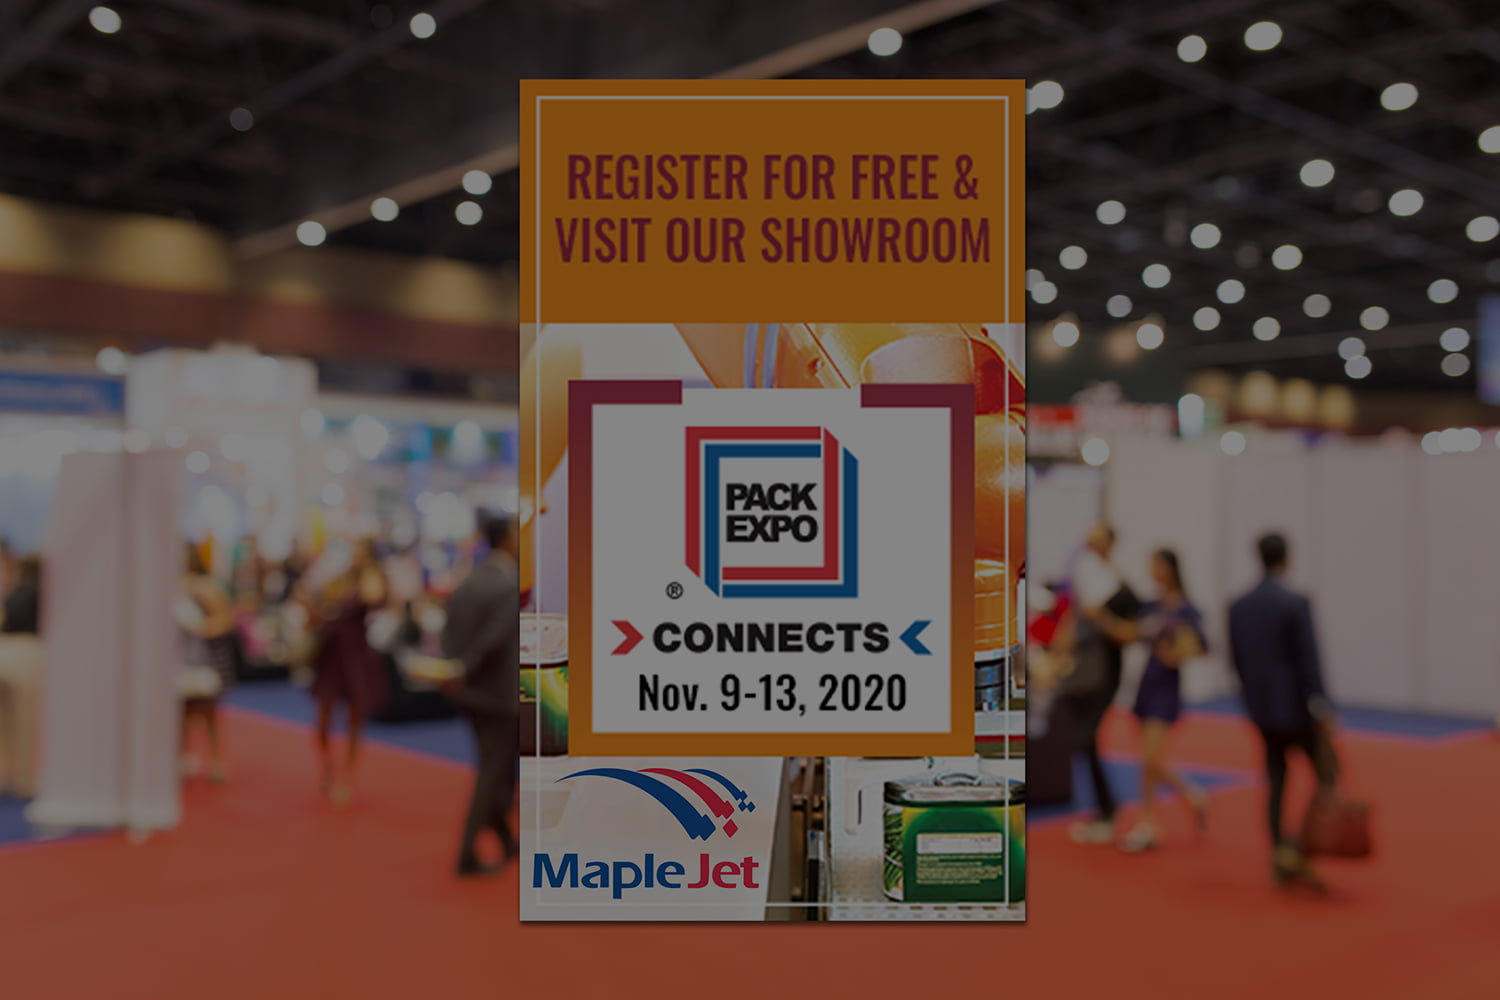 MapleJet is exhibiting at the virtual Pack Expo Connects 2020 trade show